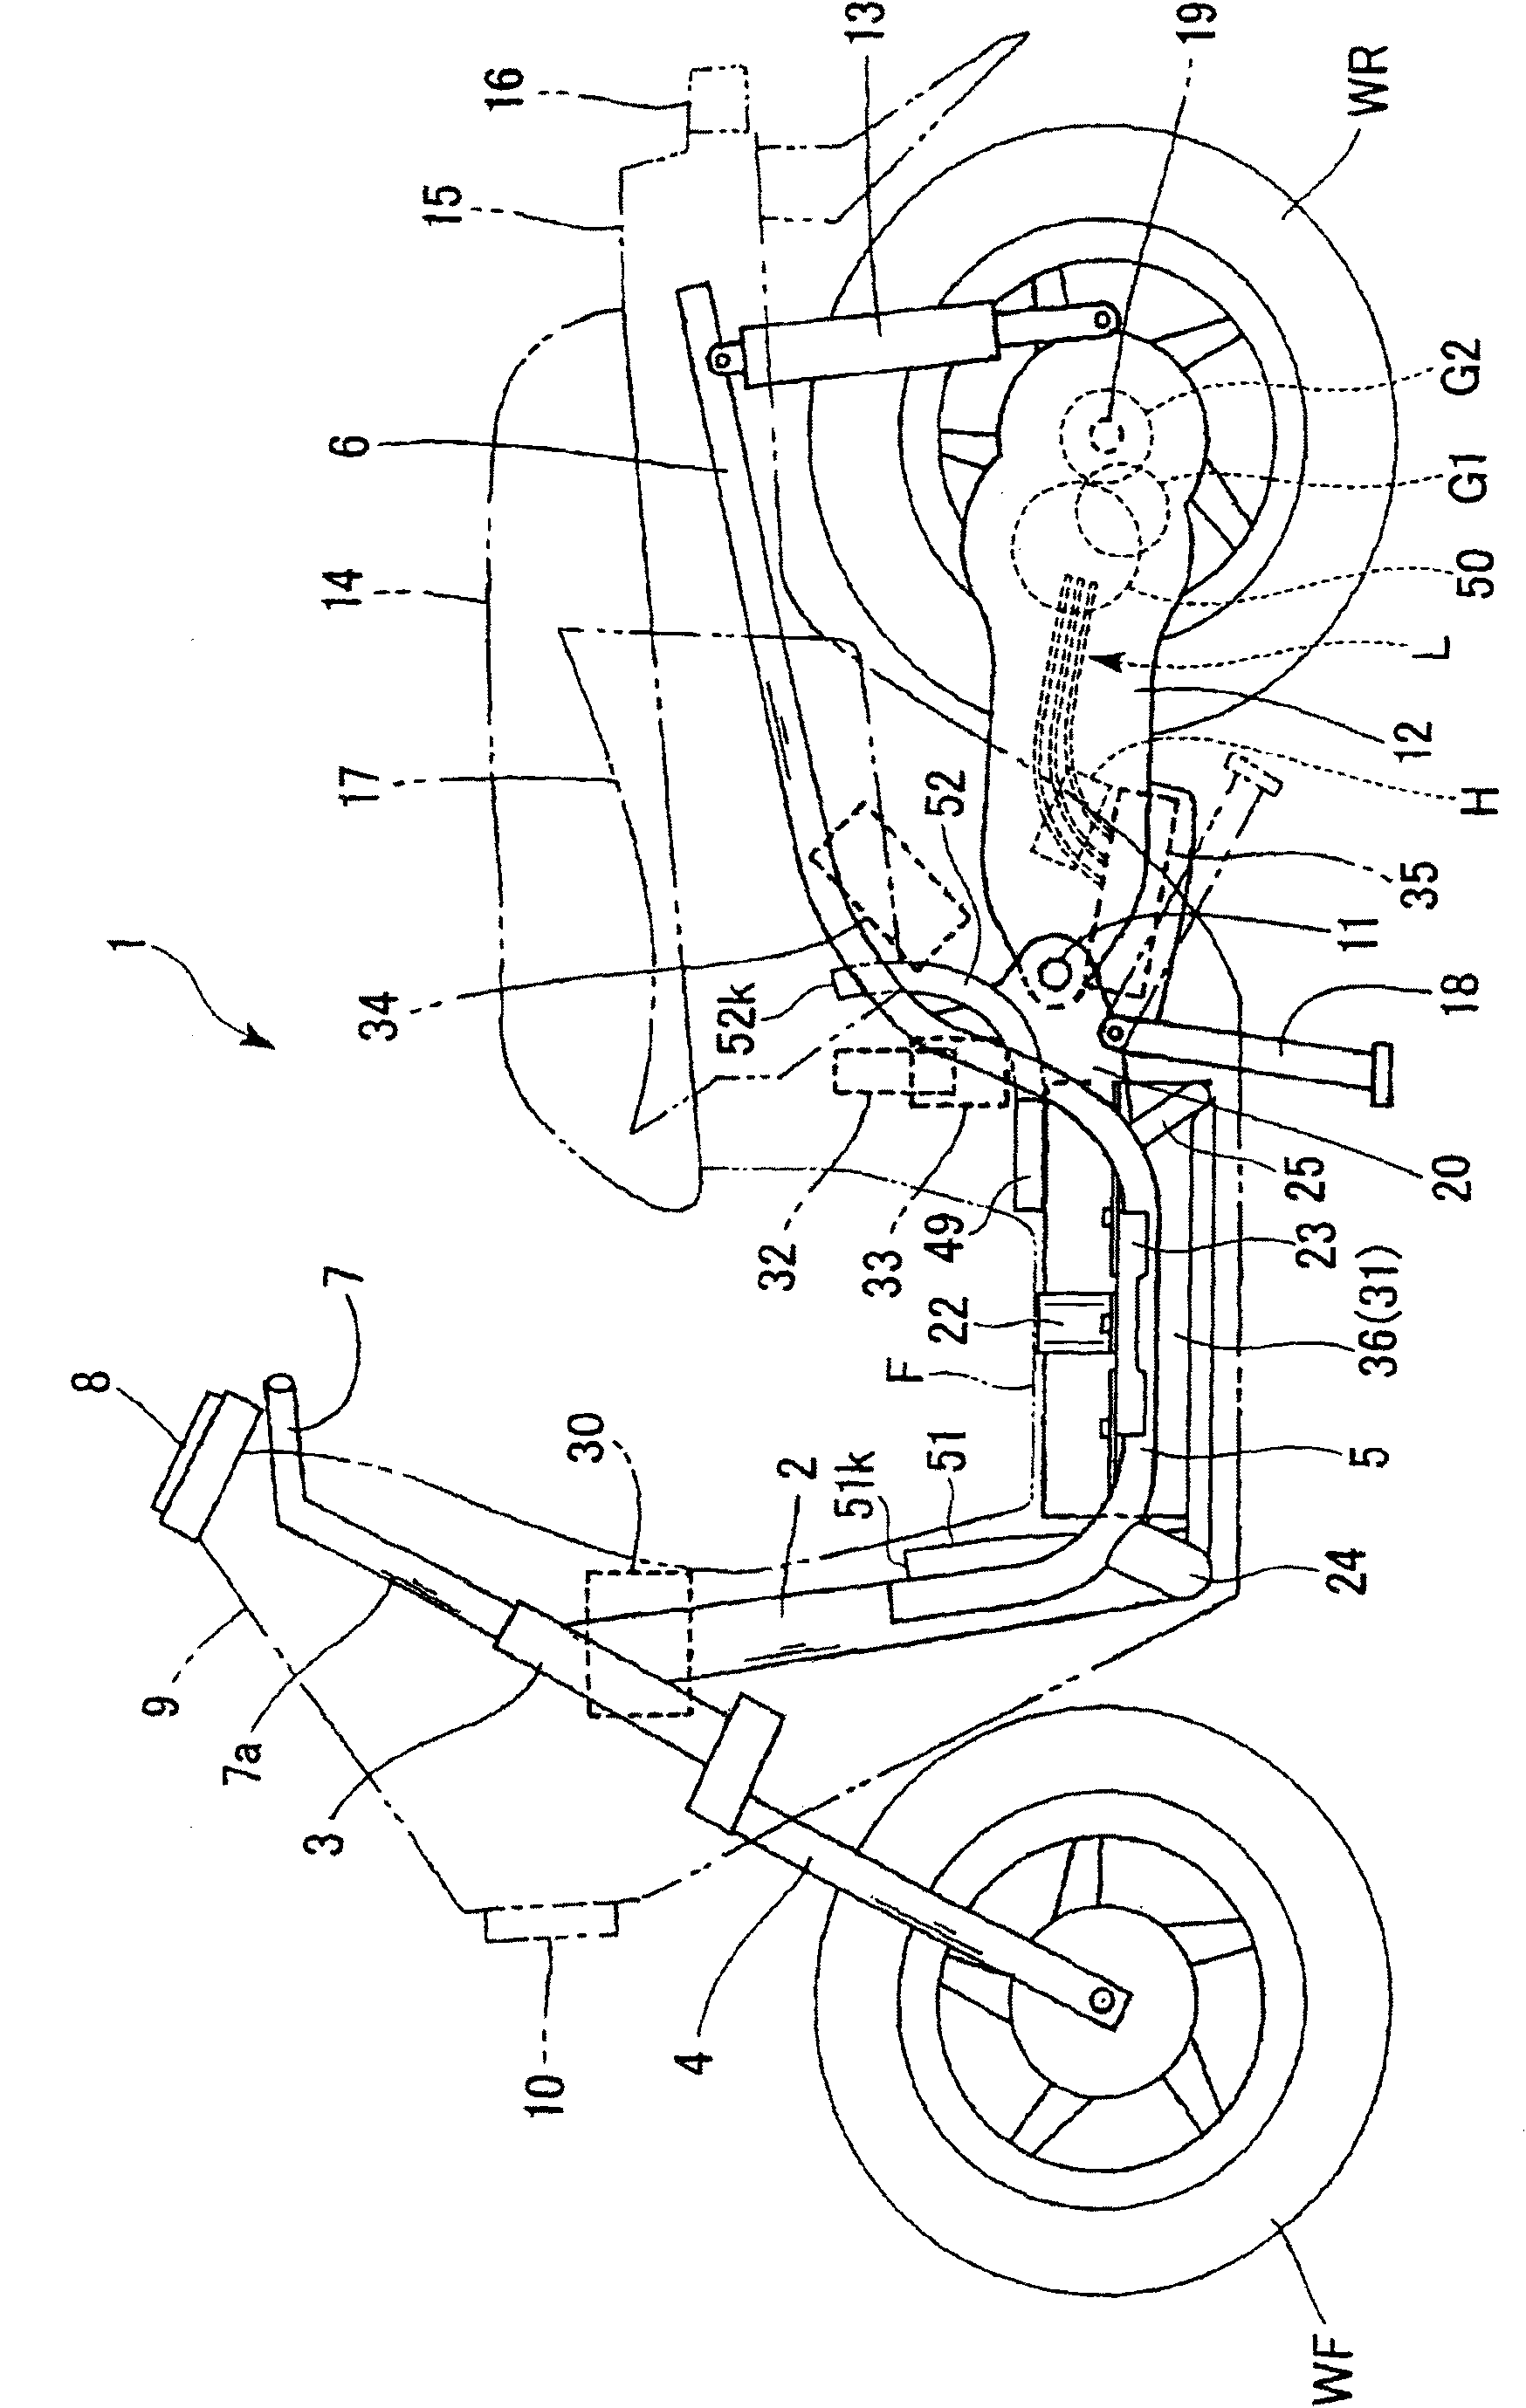 Accumulator device for motorcycle